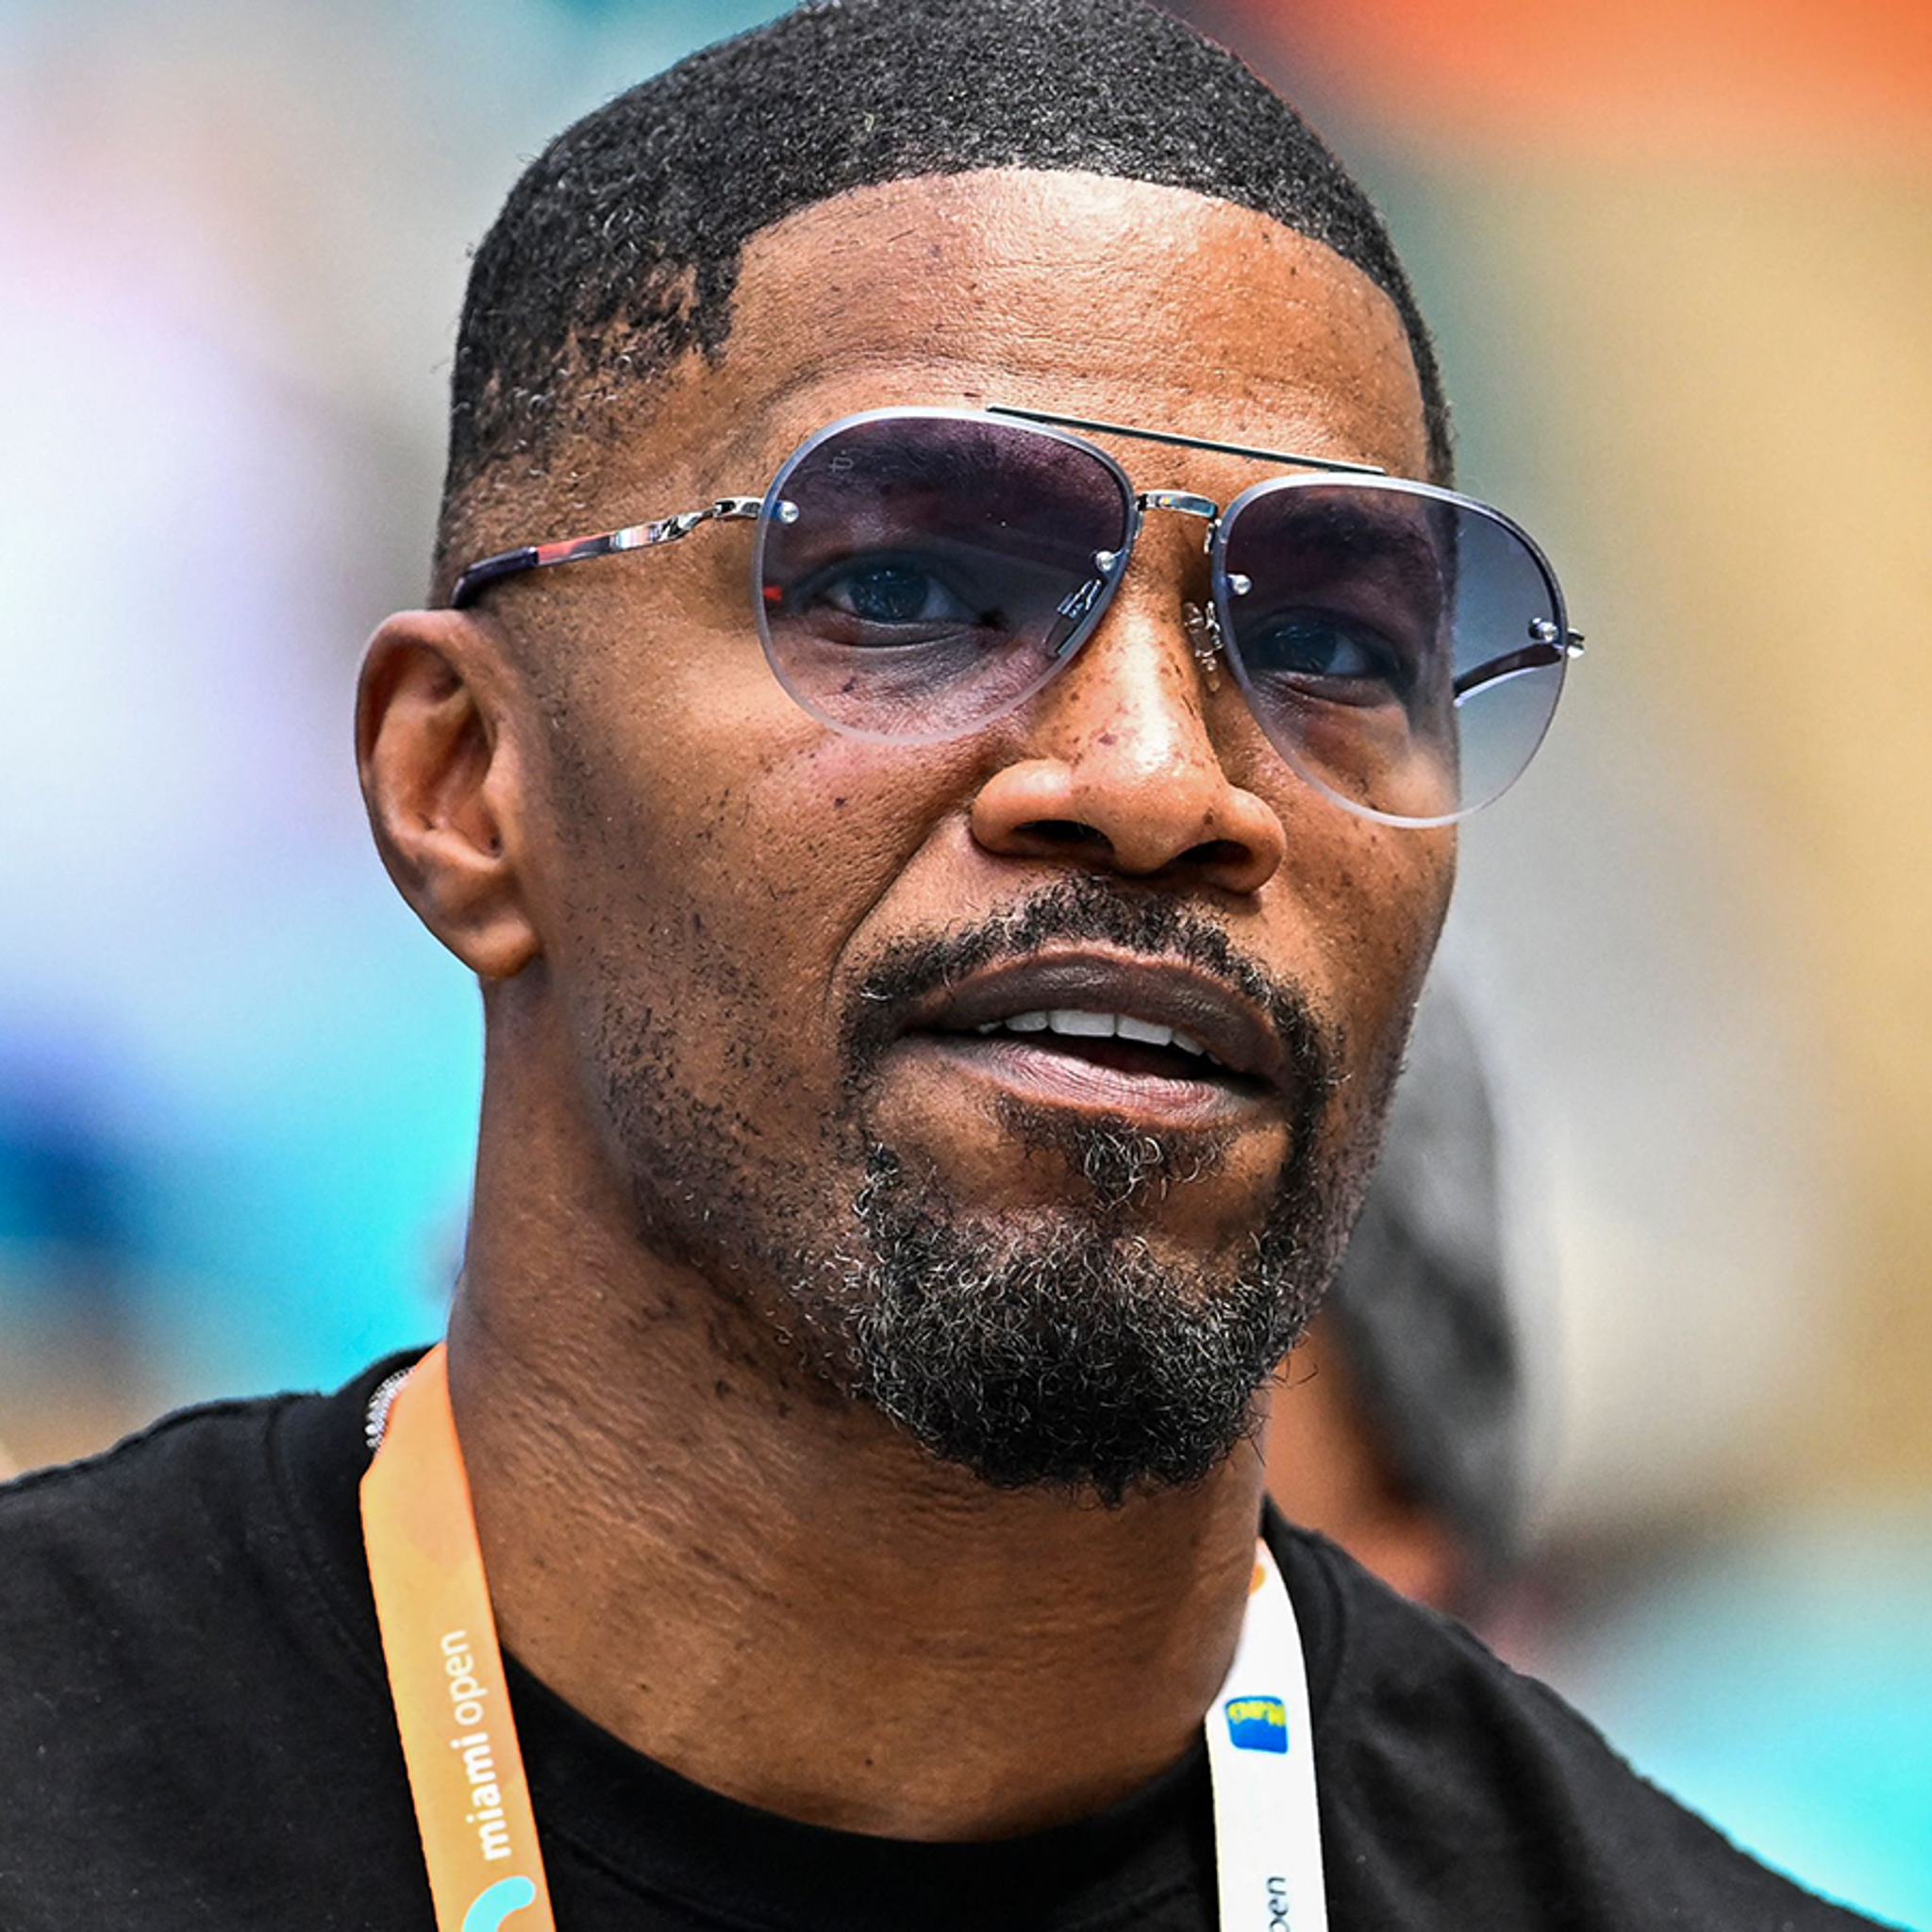 Jamie Foxx Hospitalized with 'Medical Complication,' Family Says